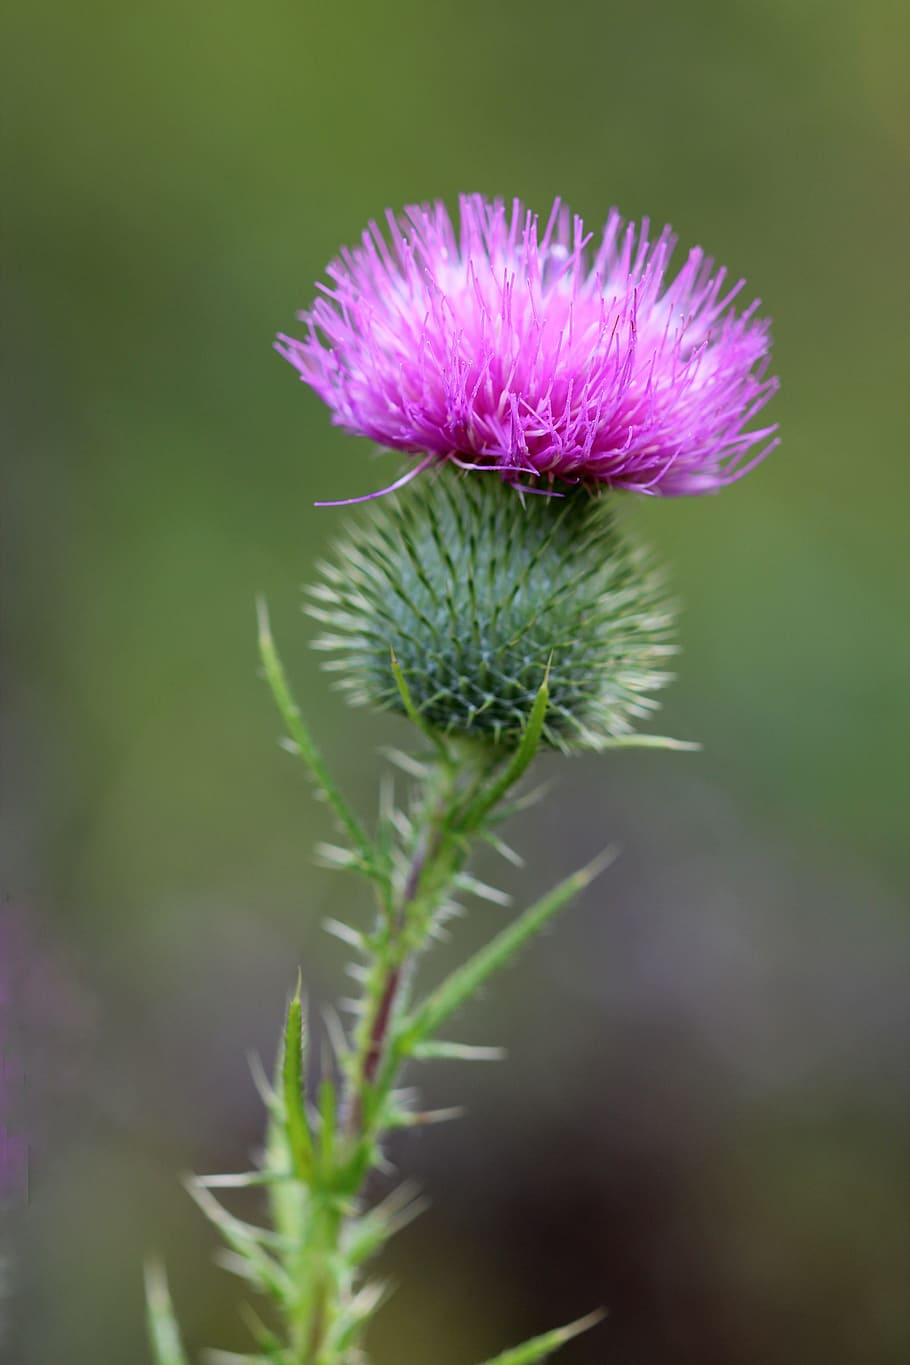 thistle, weed, plant, flower, nature, wild, blossom, natural